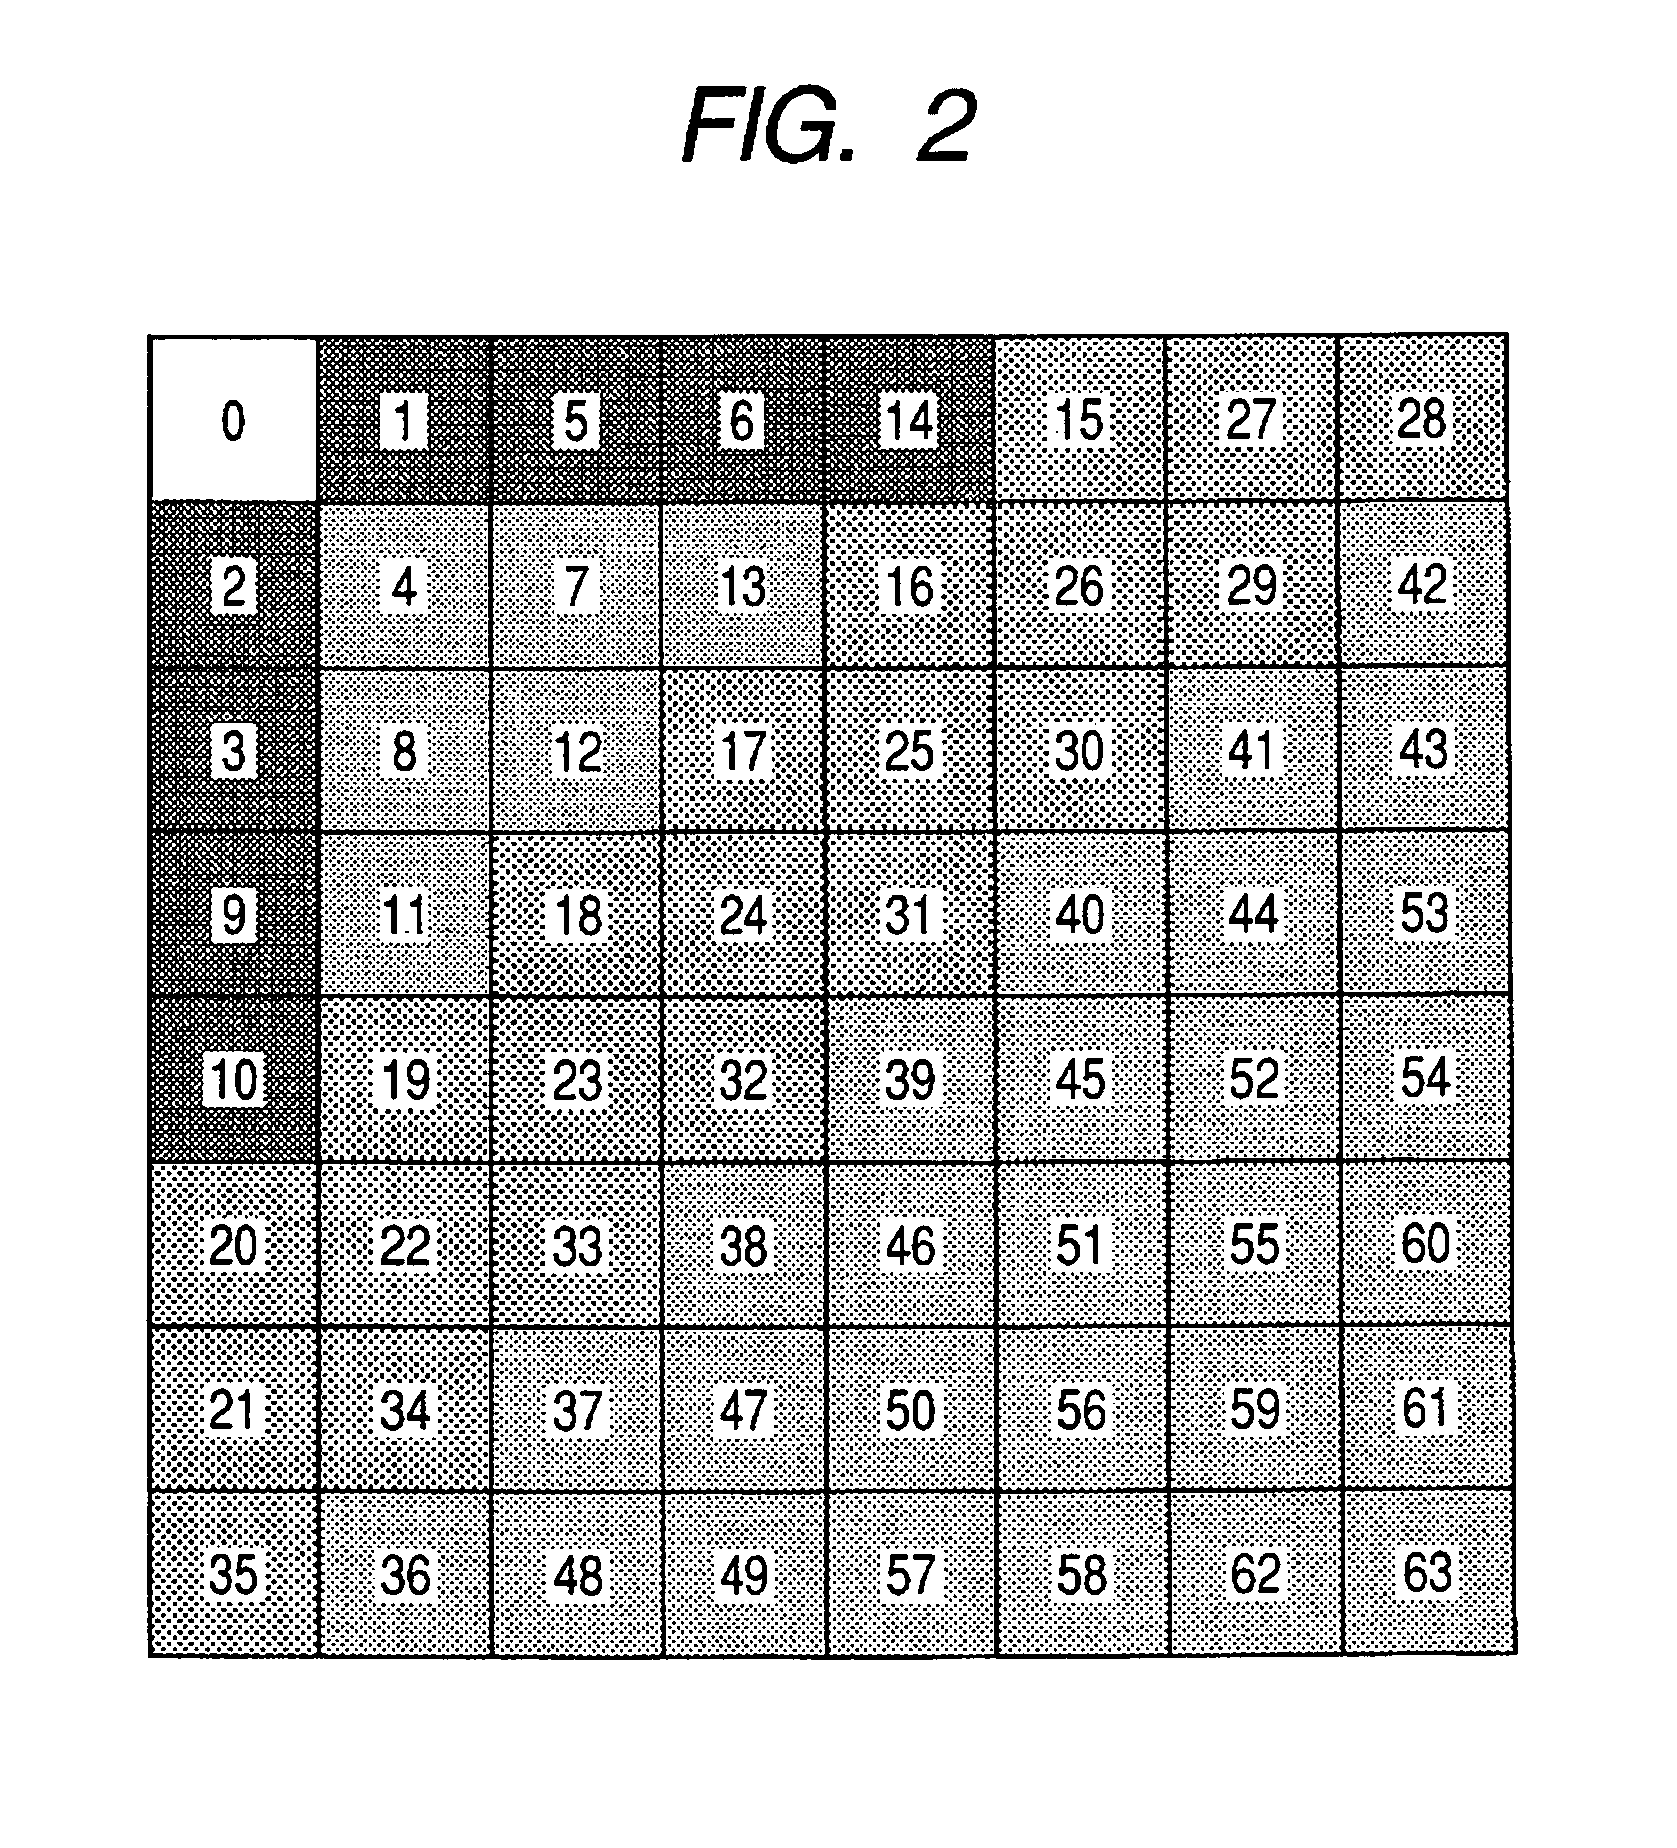 Image processing apparatus, method of controlling thereof, and program